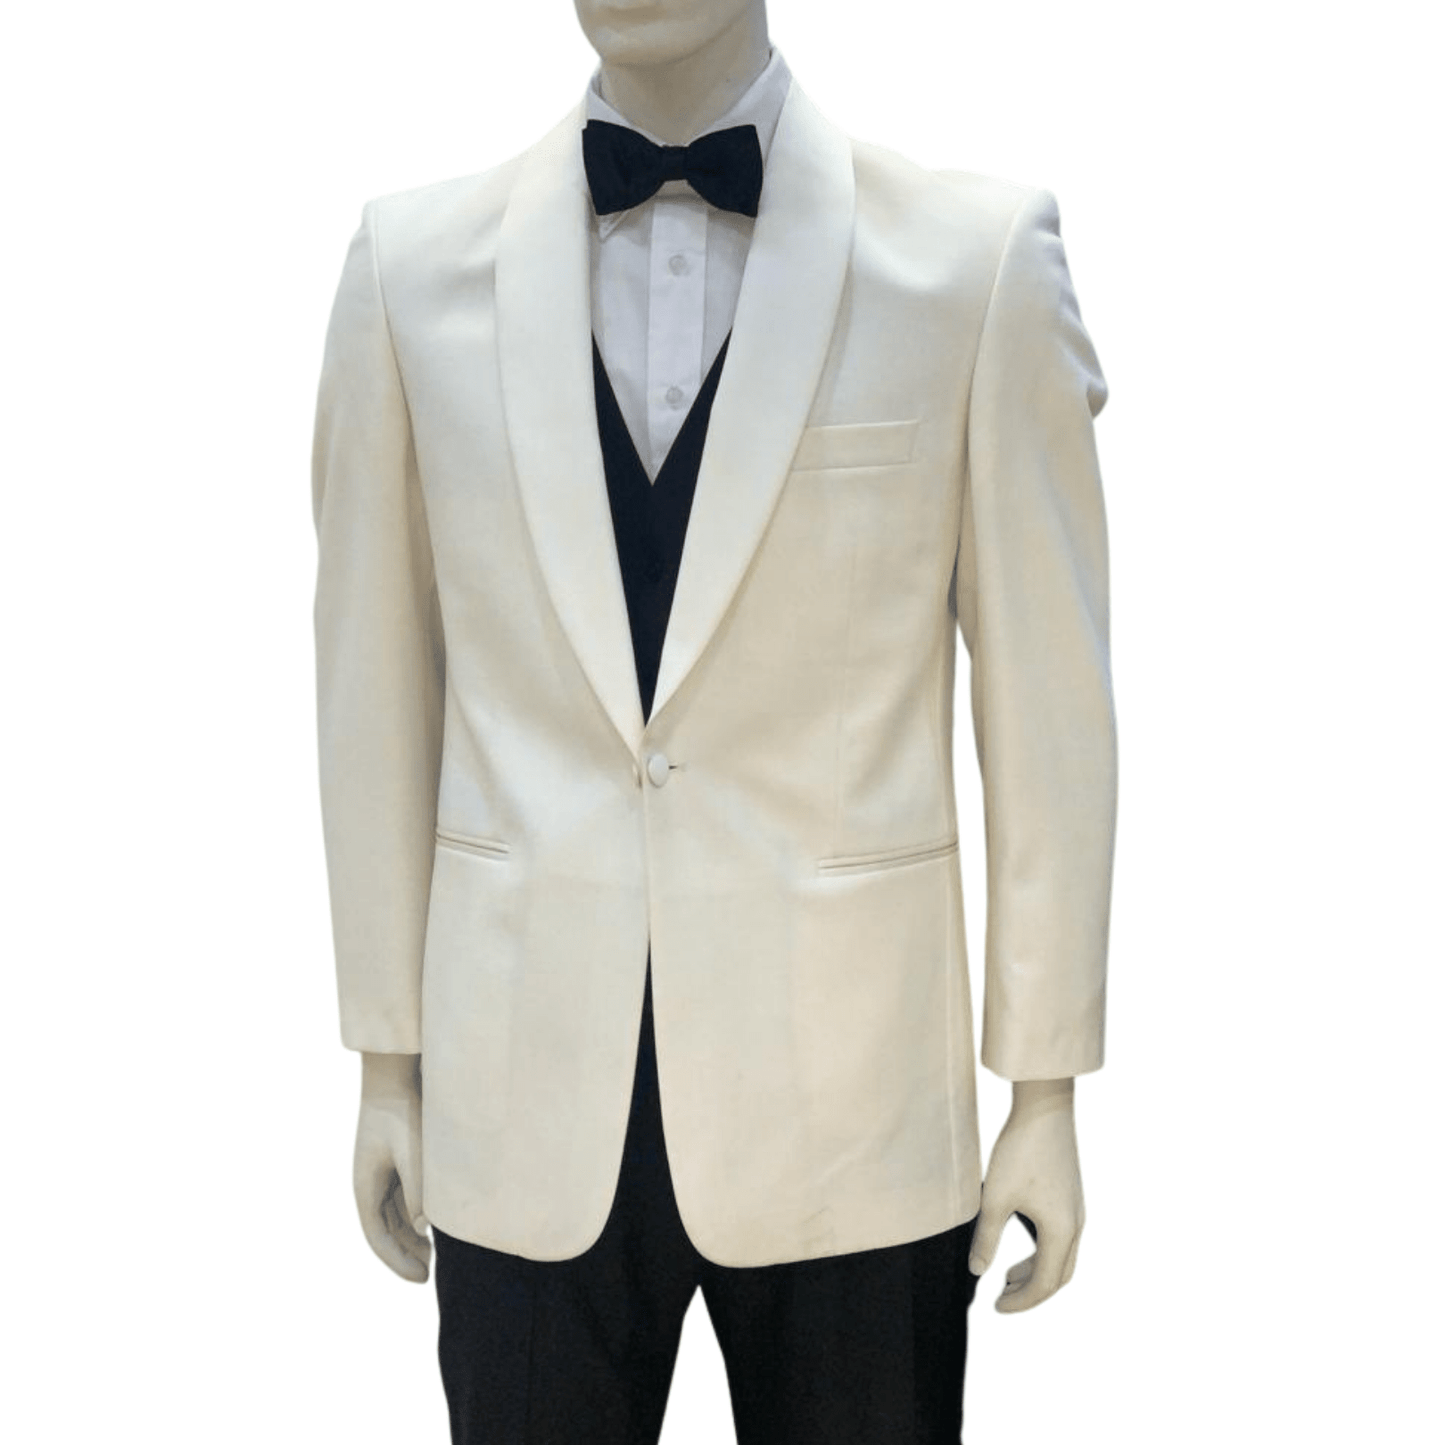 ITSUITS white Tux jacket available in 3 piece or separates